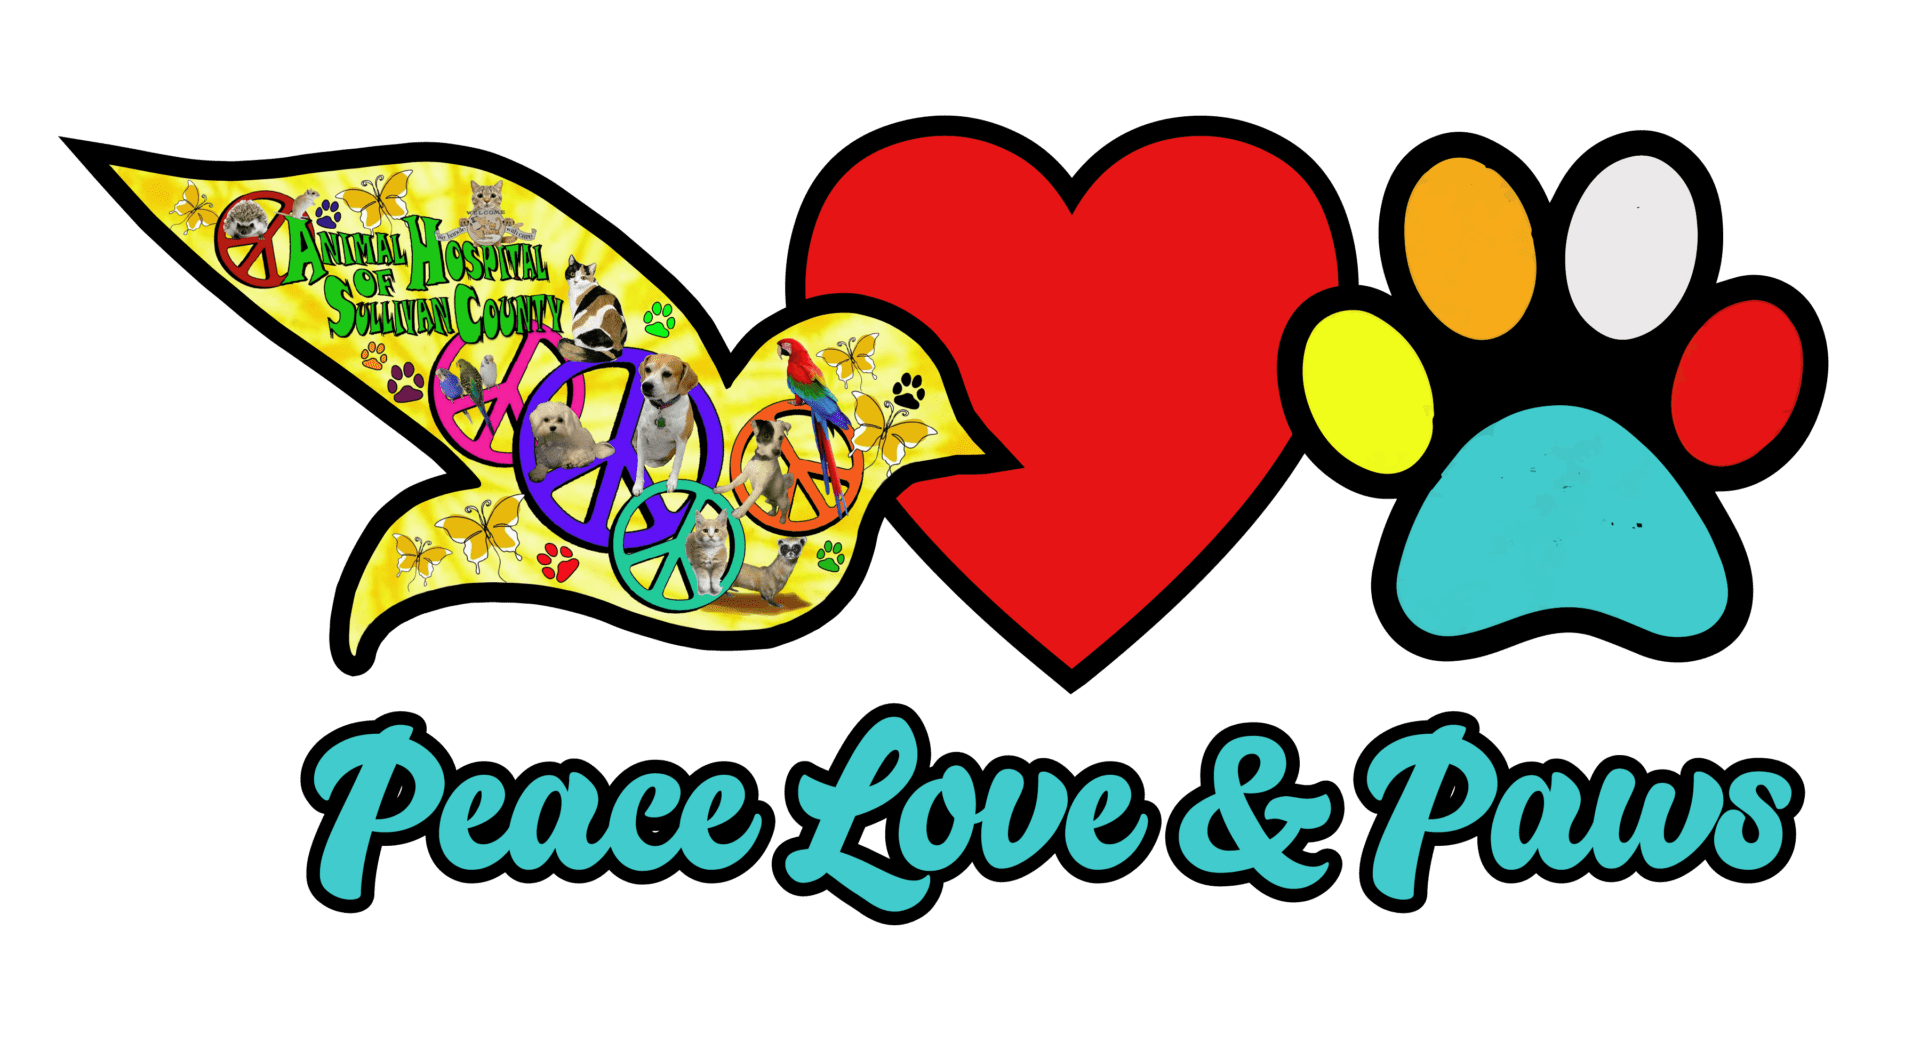 A logo for Peace Love & Paws